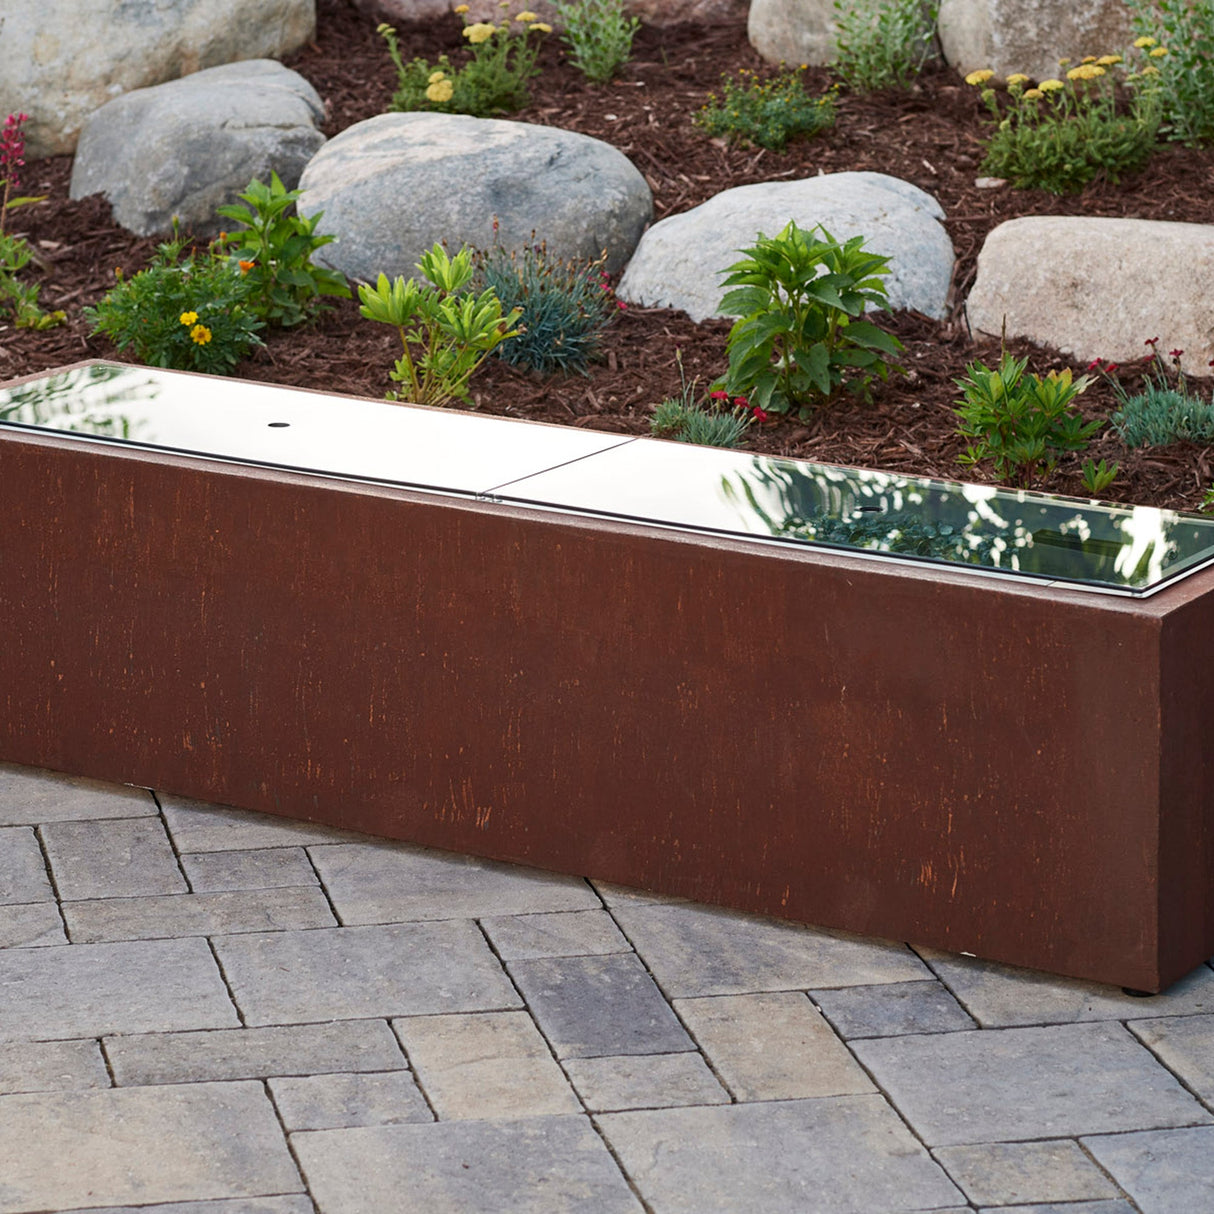 The Linear Glass Burner Cover being used on a linear fire pit table